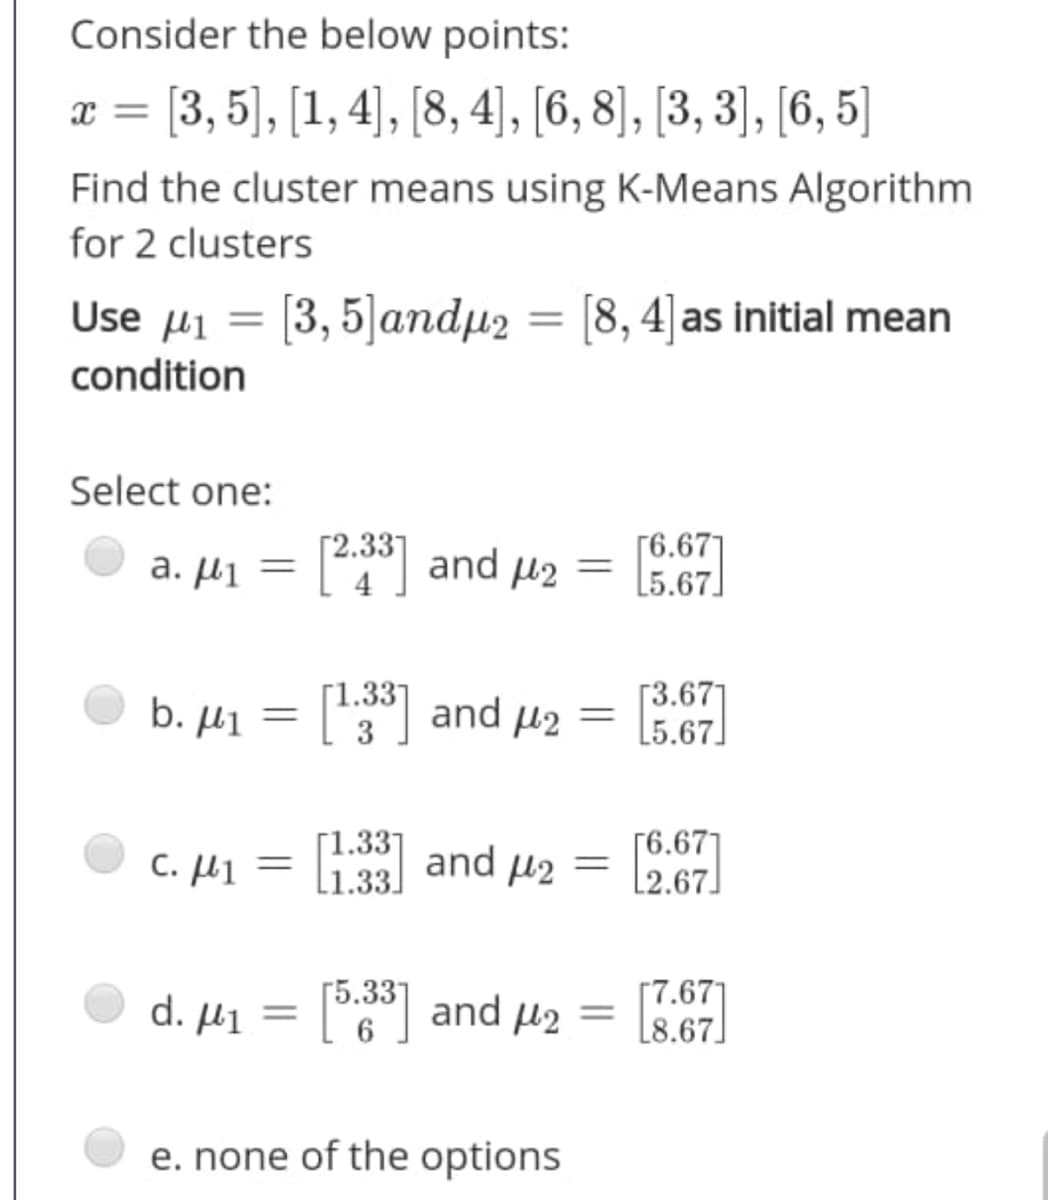 Consider the below points:
x = [3, 5), [1,4), [8, 4], [6, 8], [3, 3)], [6, 5]
%3D
Find the cluster means using K-Means Algorithm
for 2 clusters
Use µi = [3, 5]andµ2 = [8, 4]as initial mean
%3D
condition
Select one:
Г6.671
a. µi = [°] and µ2 = 567.
%3D
Г1.337
b. µ1 = ['3"] and µ2
Г3.671
L5.67]
c. µ1 = li:33] and µ2
Г6.671
L2.67.
%3D
L1.33.
[7.67]
L8.67]
Г5.337
d. μι
and u2
e. none of the options
